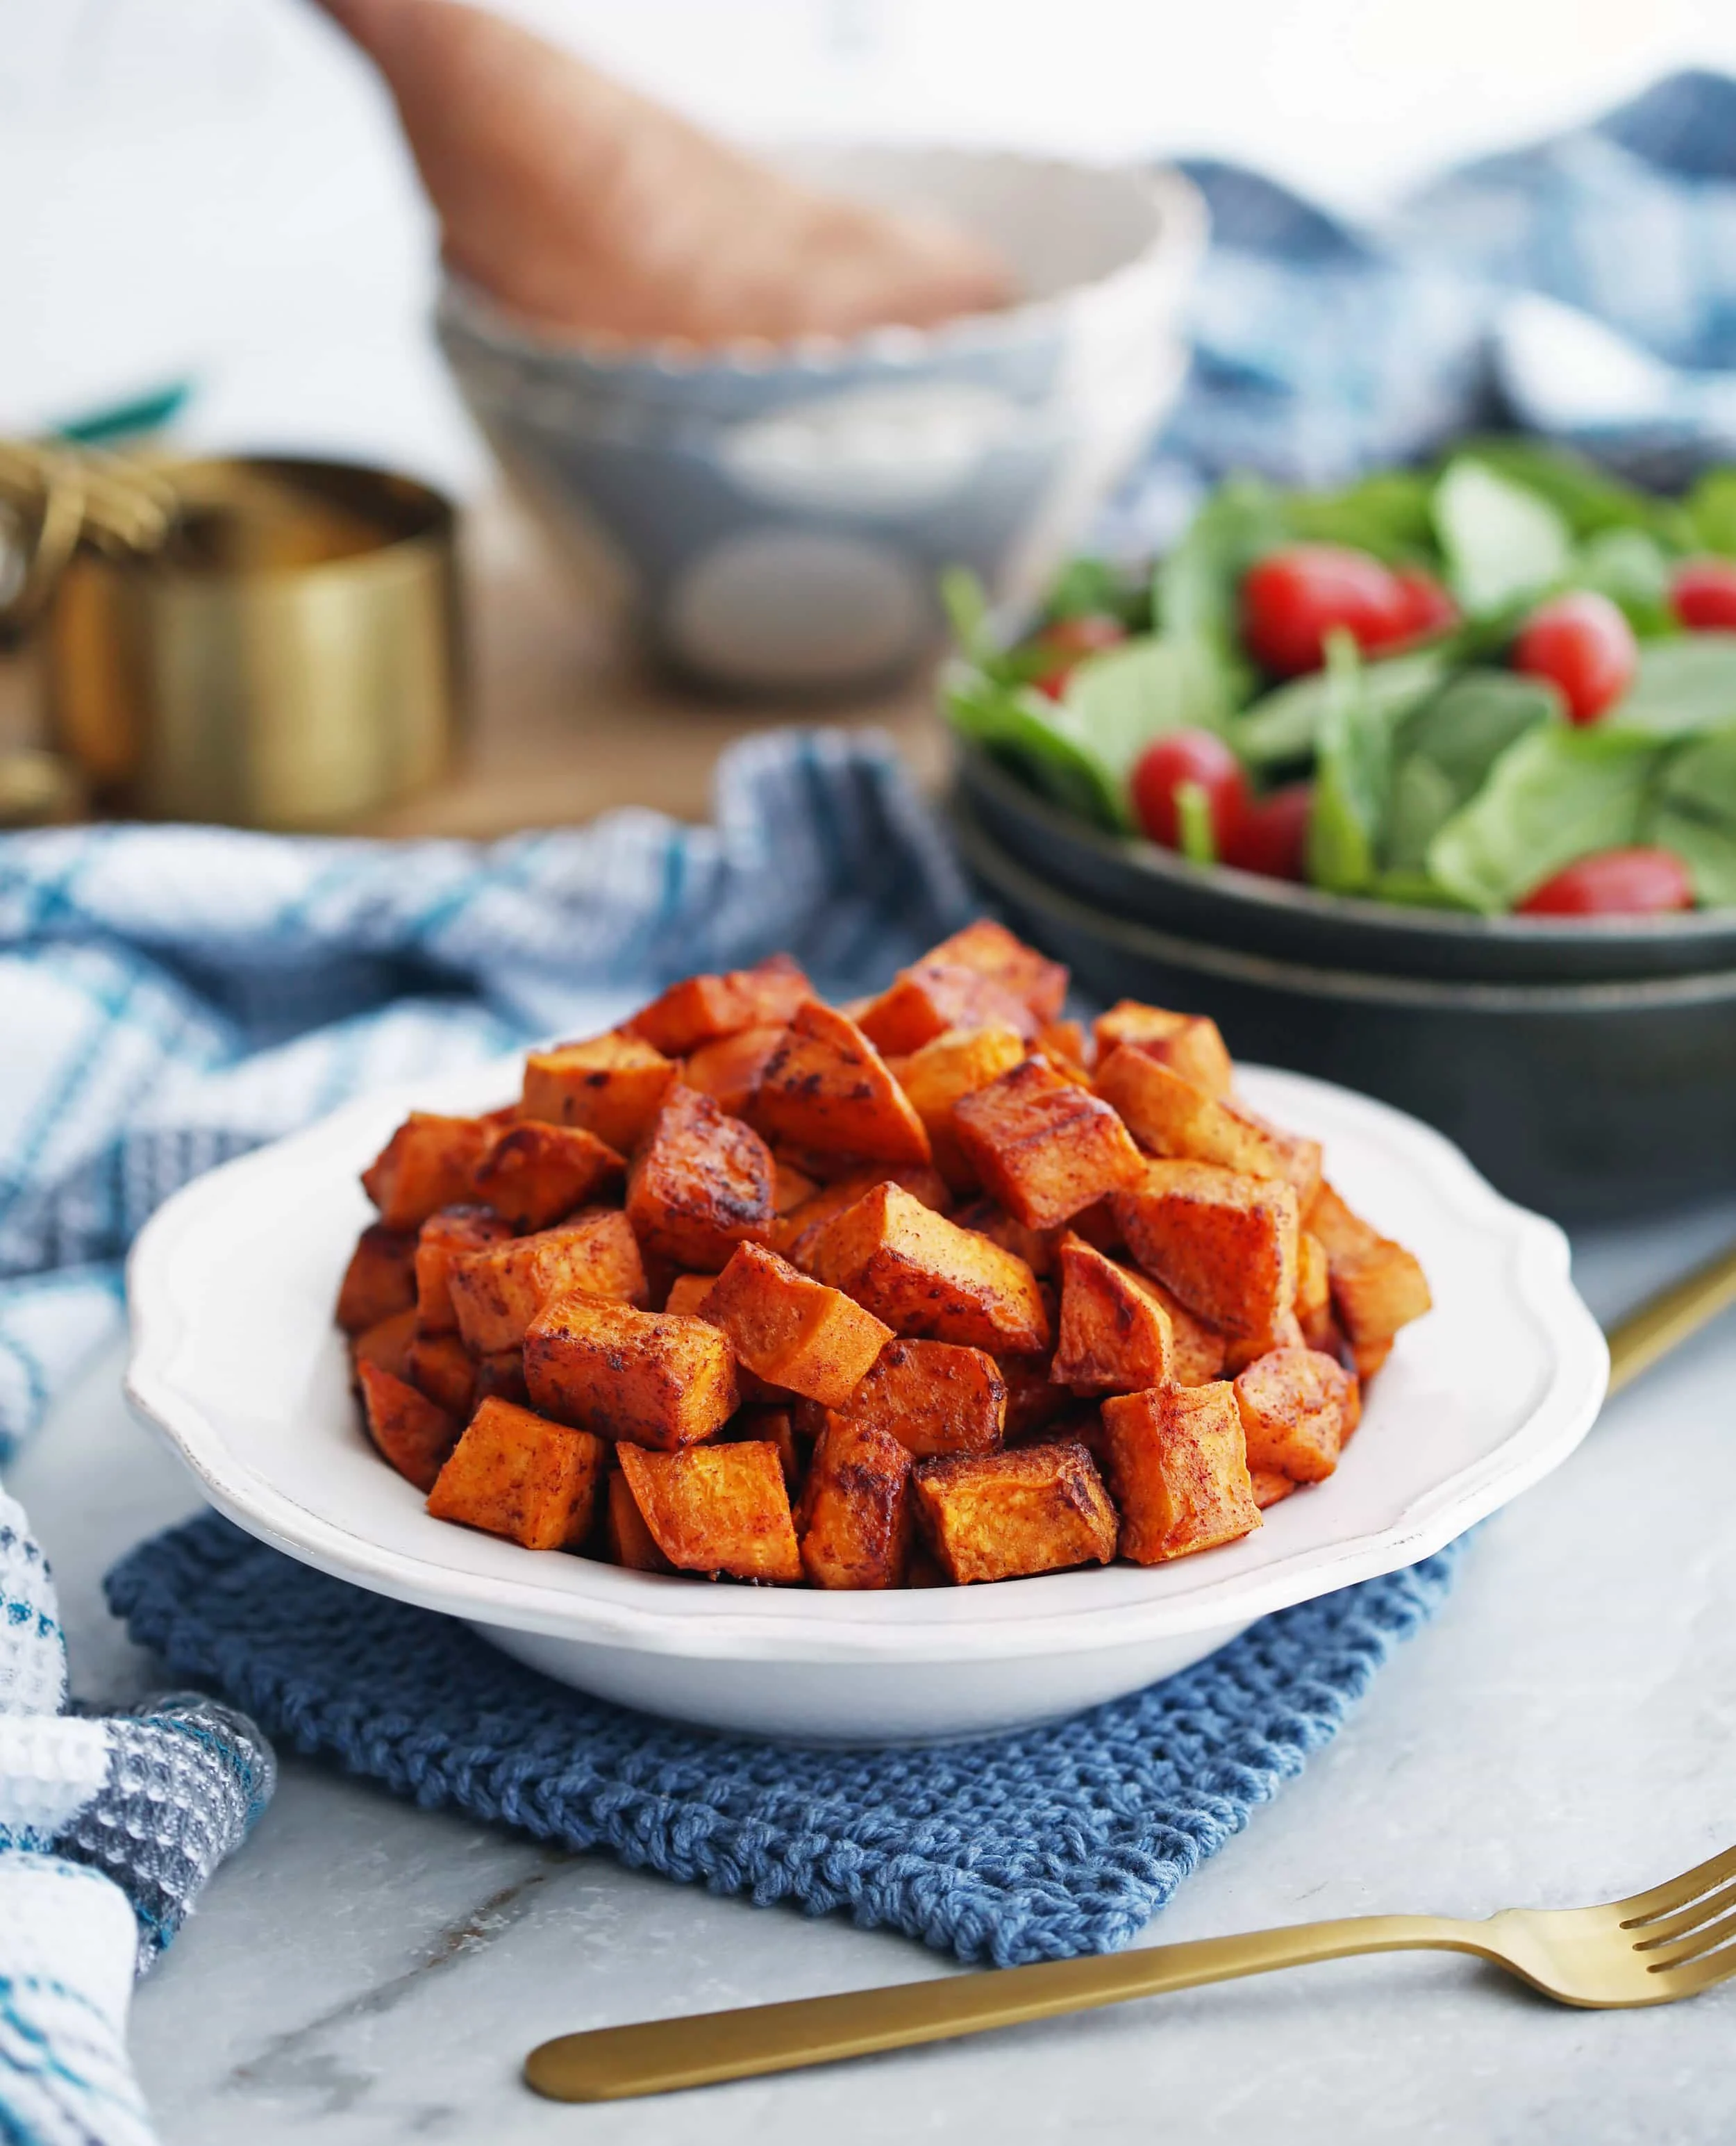 Vegan and gluten-free roasted maple cinnamon sweet potatoes pieces in a white bowl.